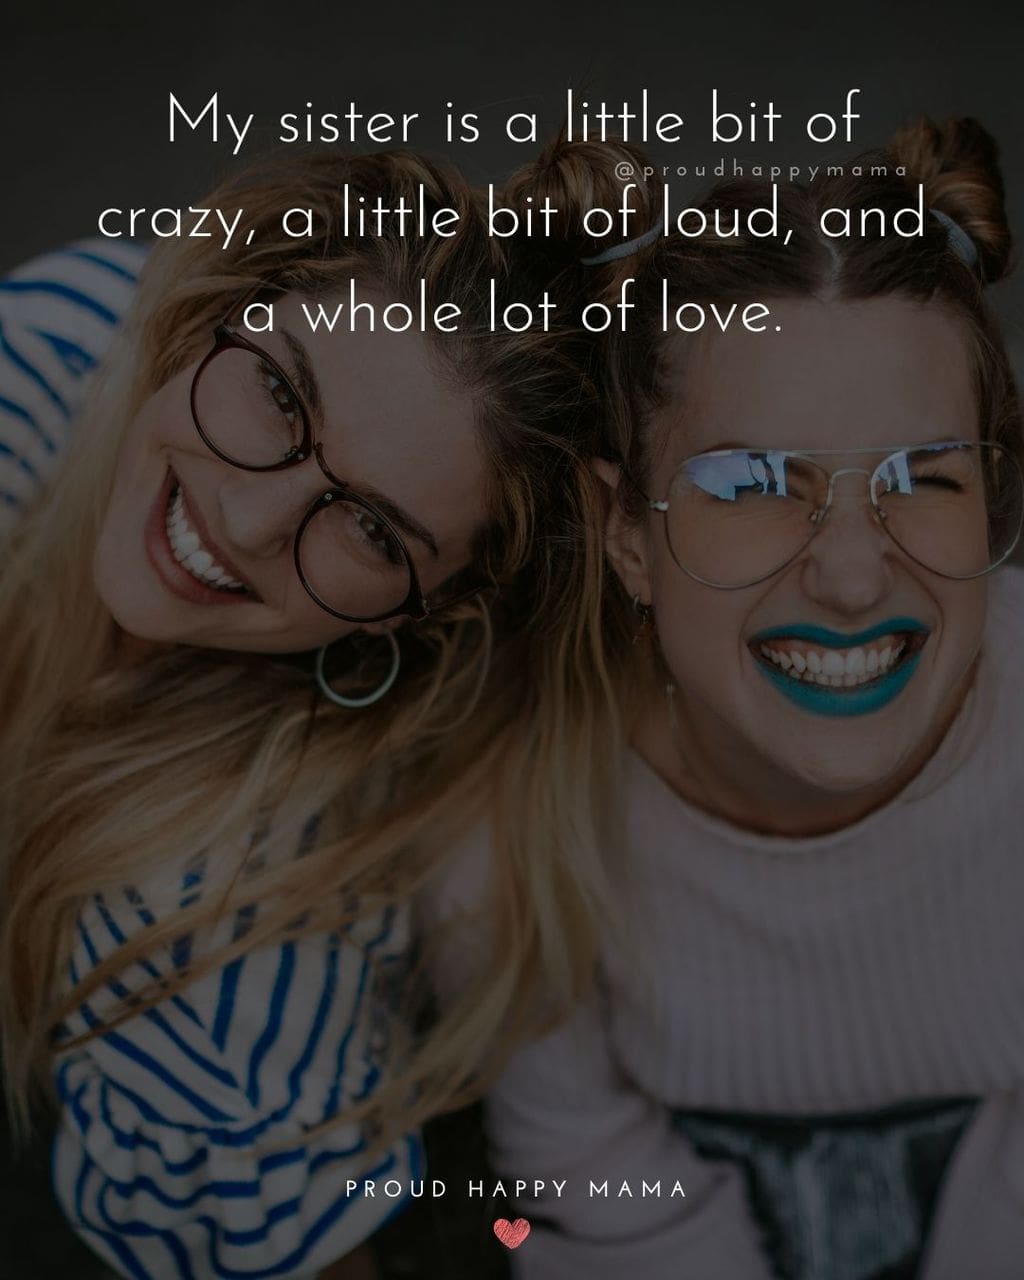 Sister Quotes - My sister is a little bit of crazy, a little bit of loud, and a whole lot of love.